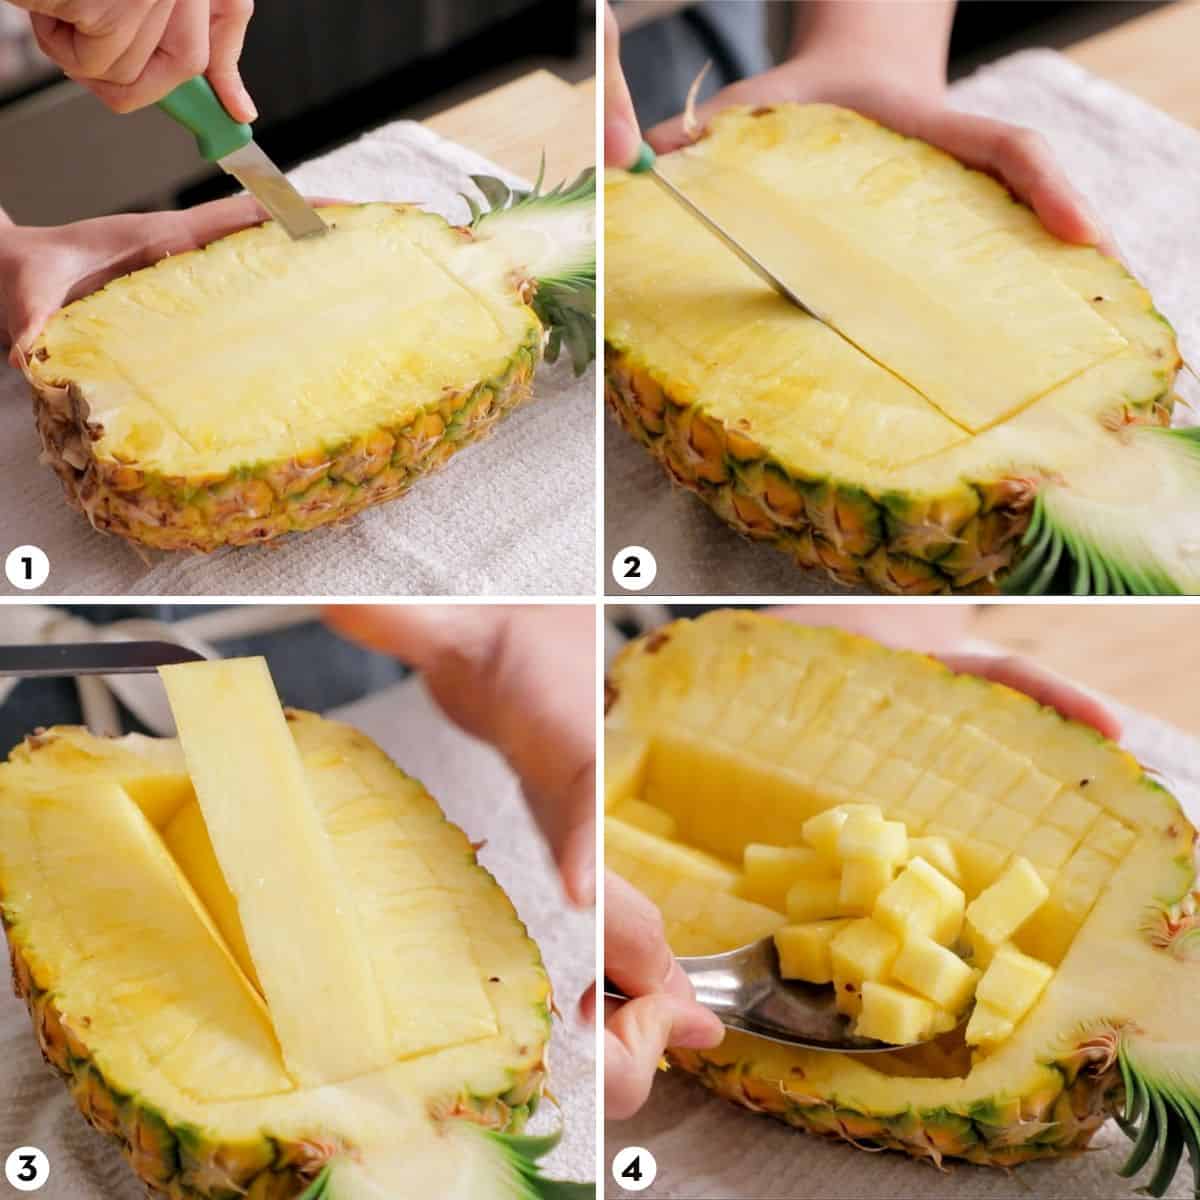 How to cut a pineapple bowl